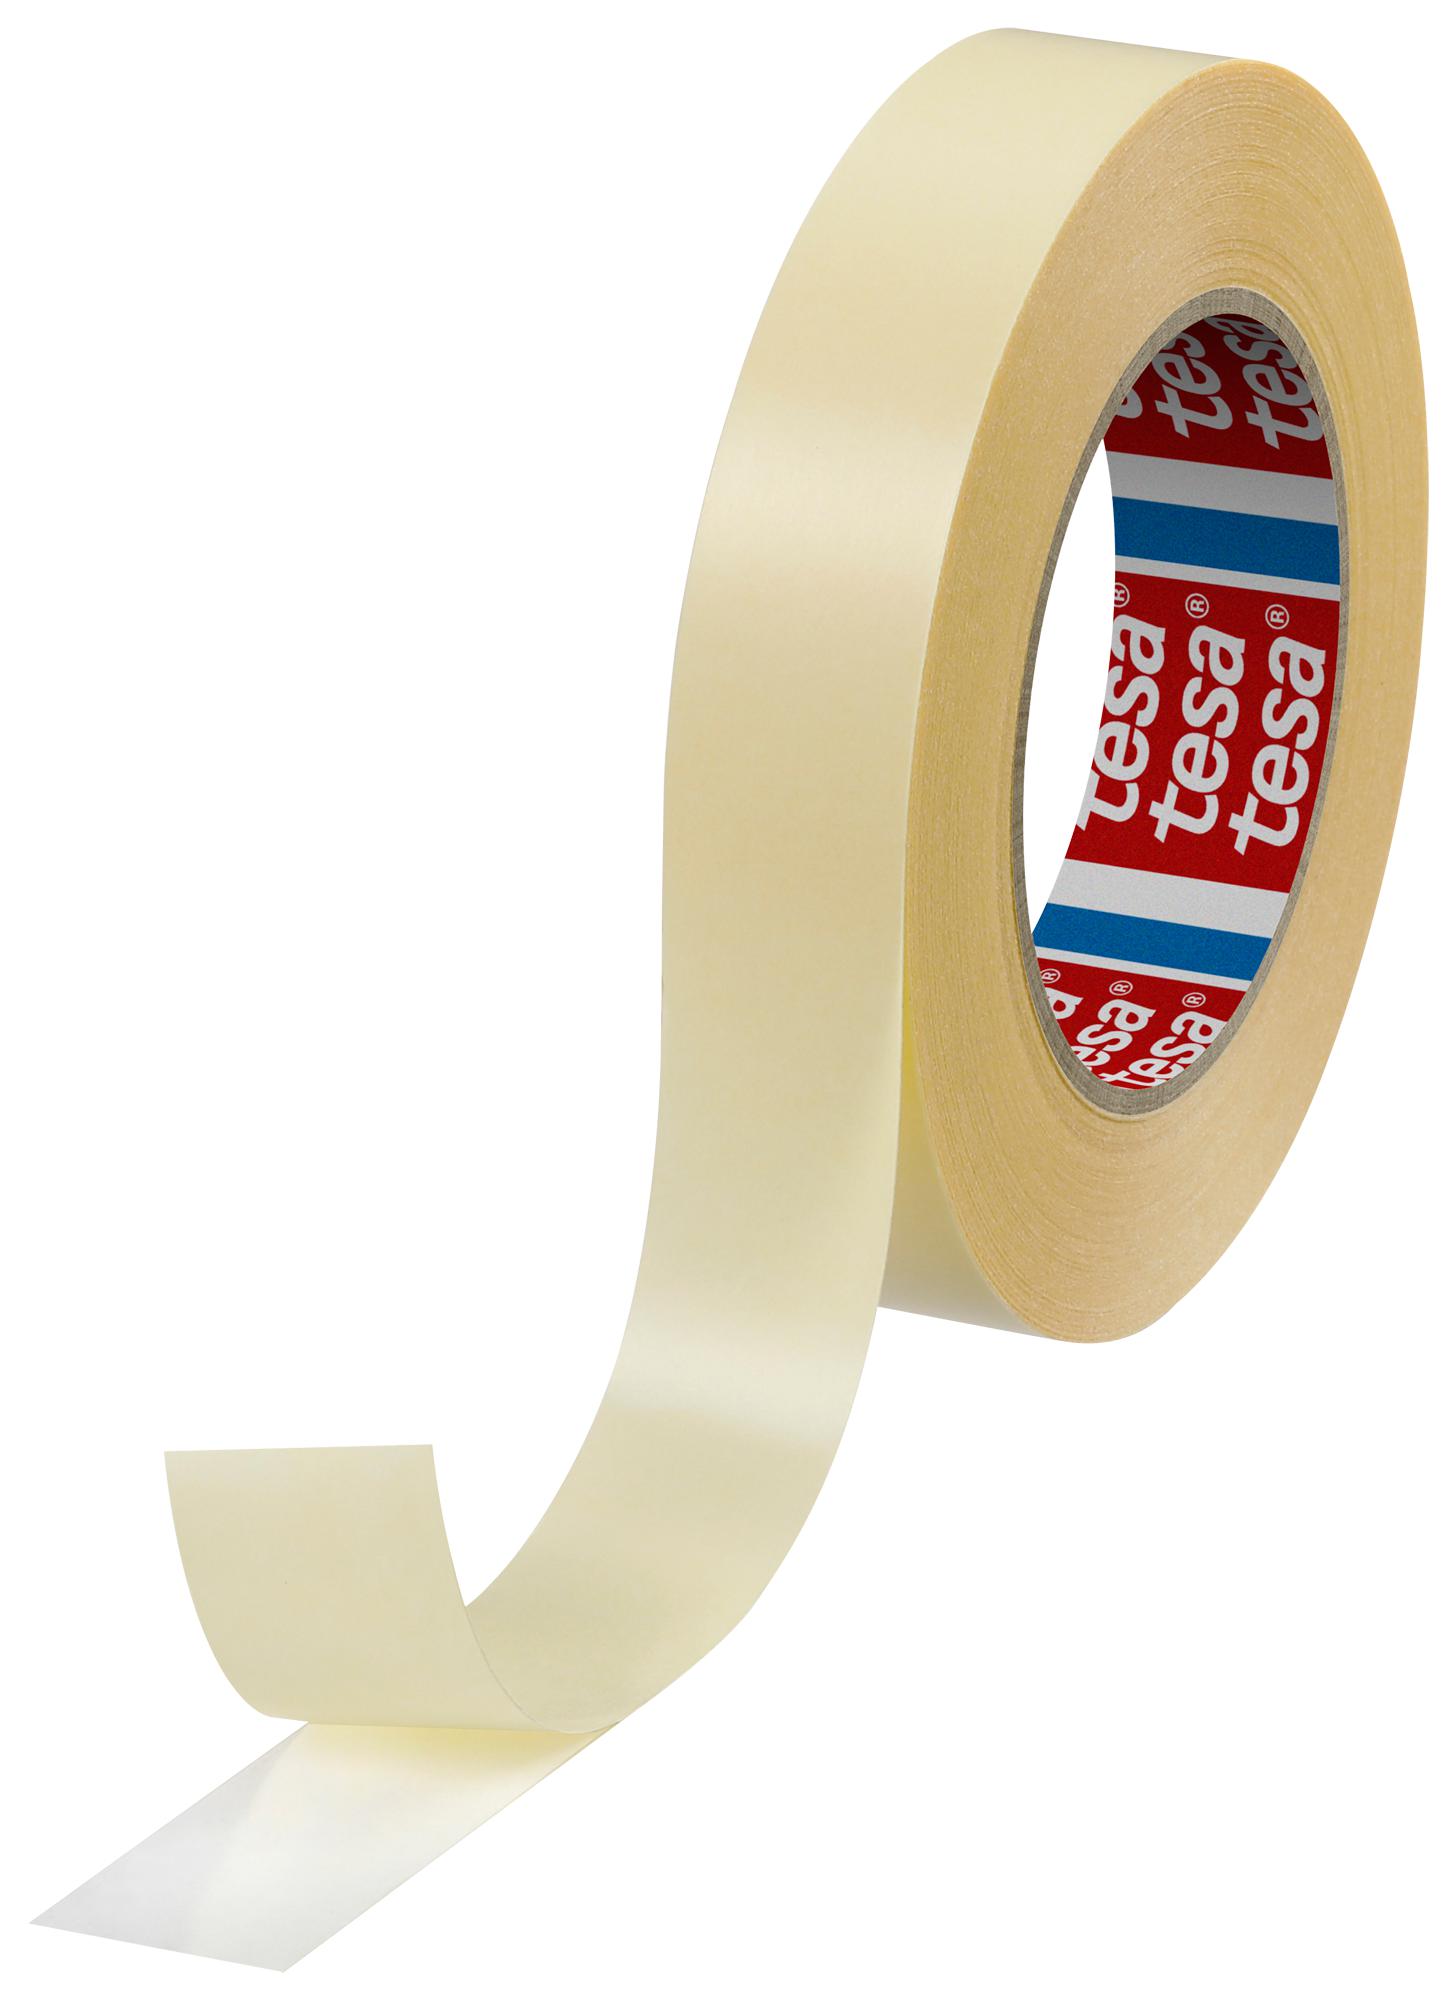 Tesa 64621-00006-00 Double Sided Tape, Pp, 50M X 25mm